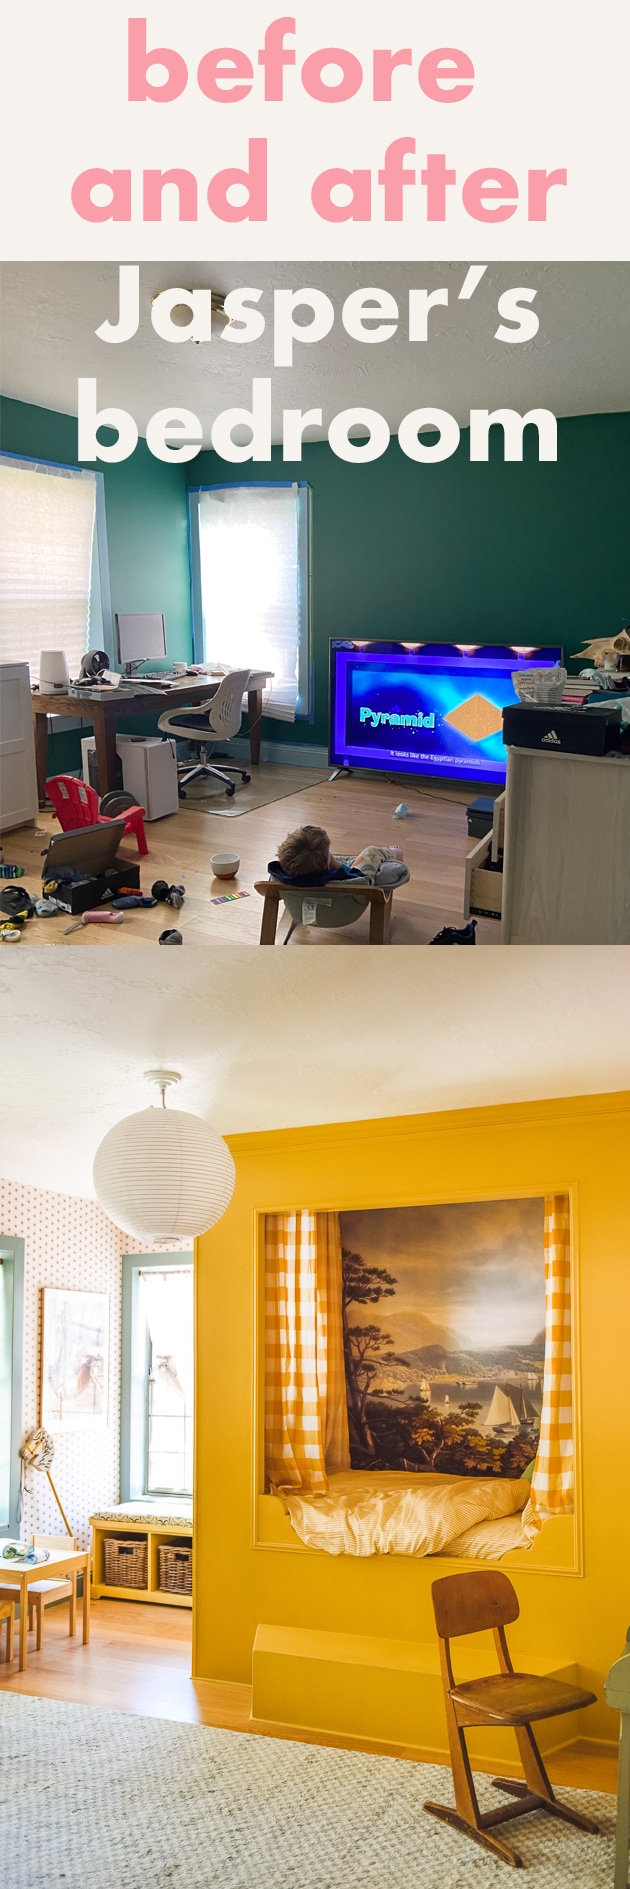 before and after child's bedroom